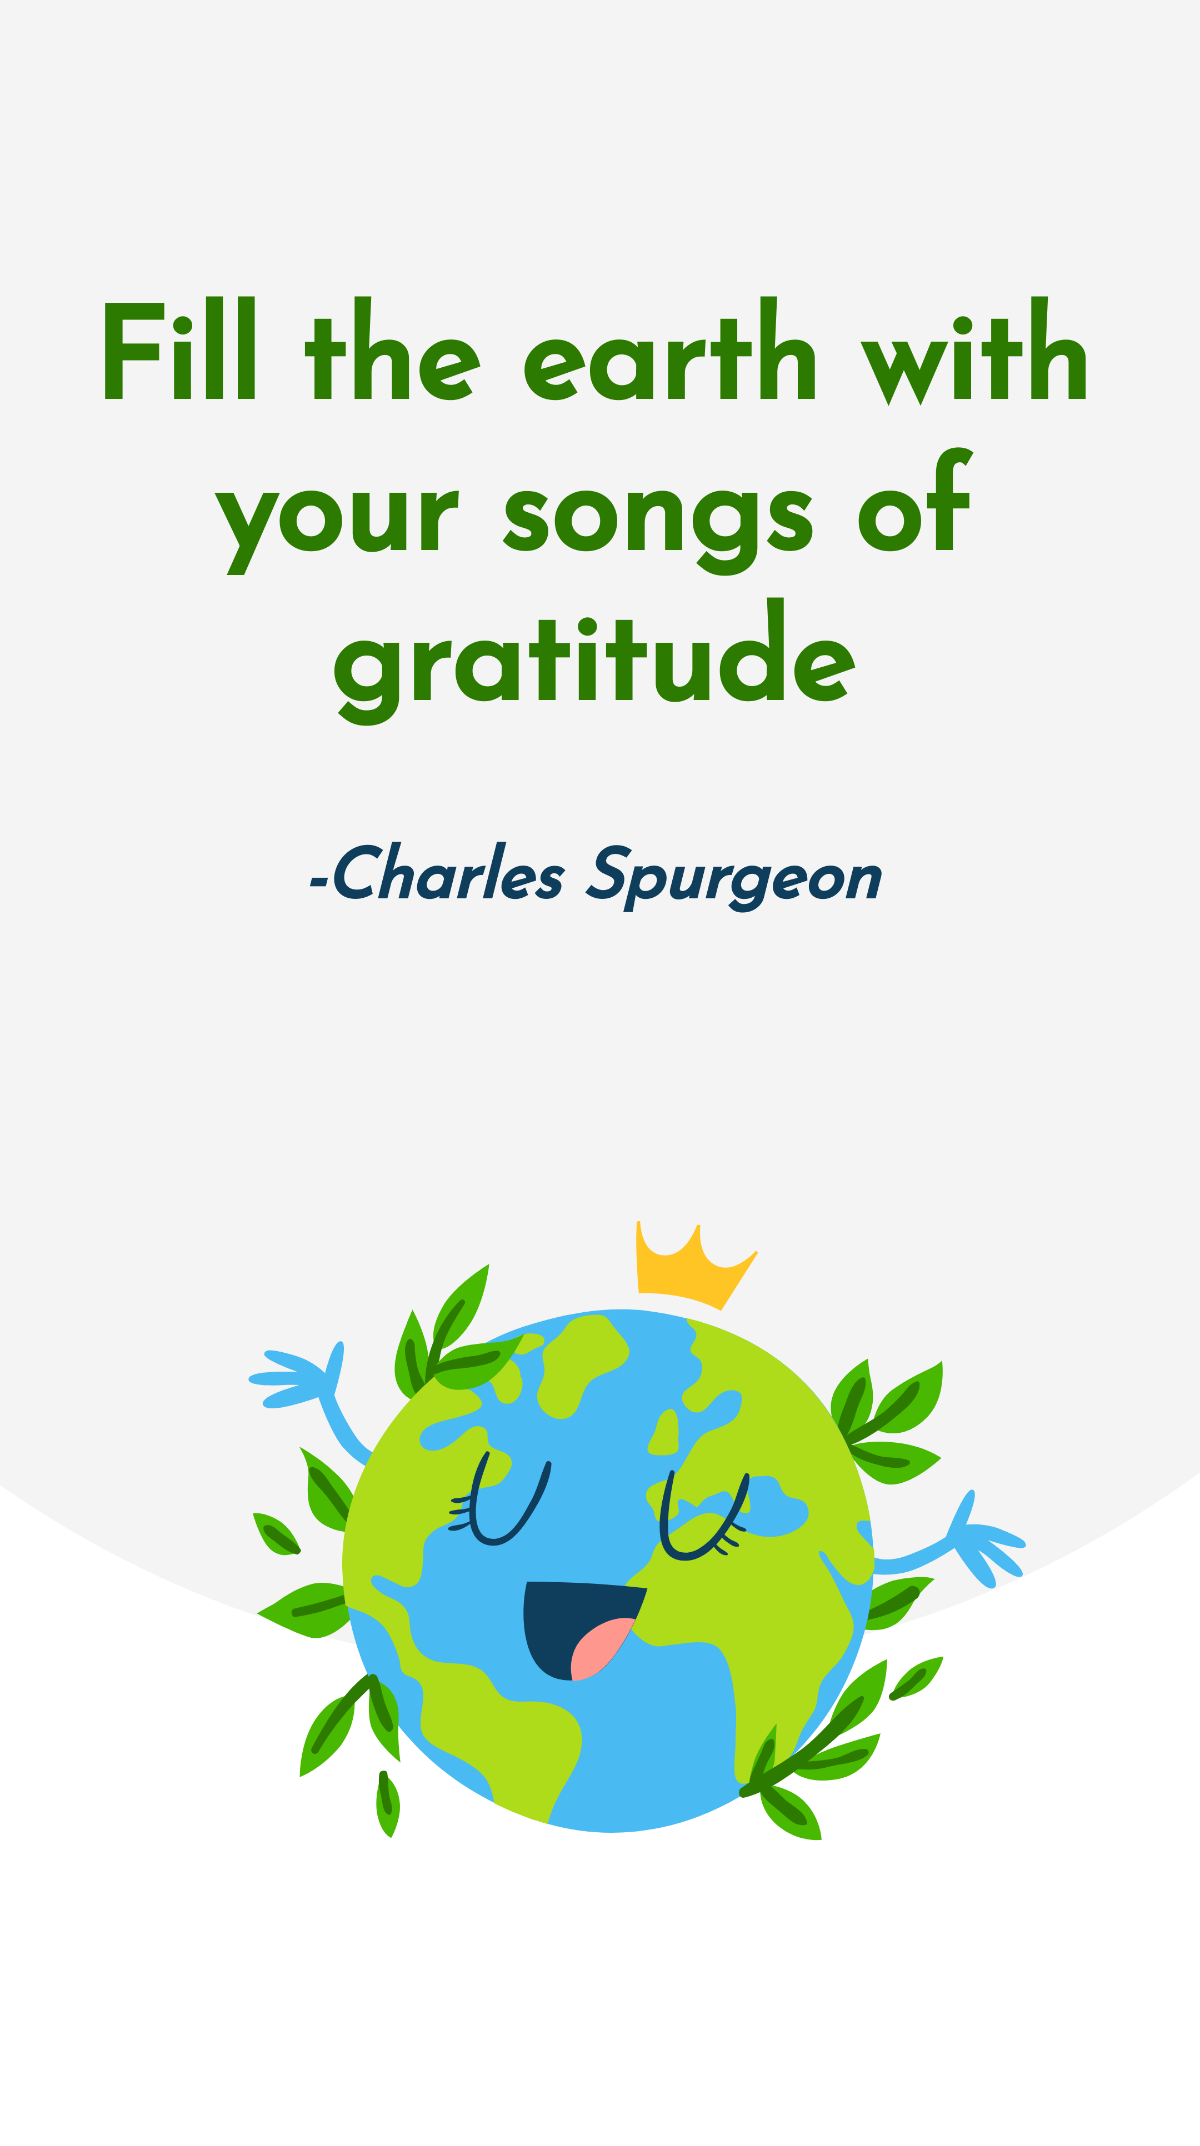 Charles Spurgeon - Fill the earth with your songs of gratitude Template